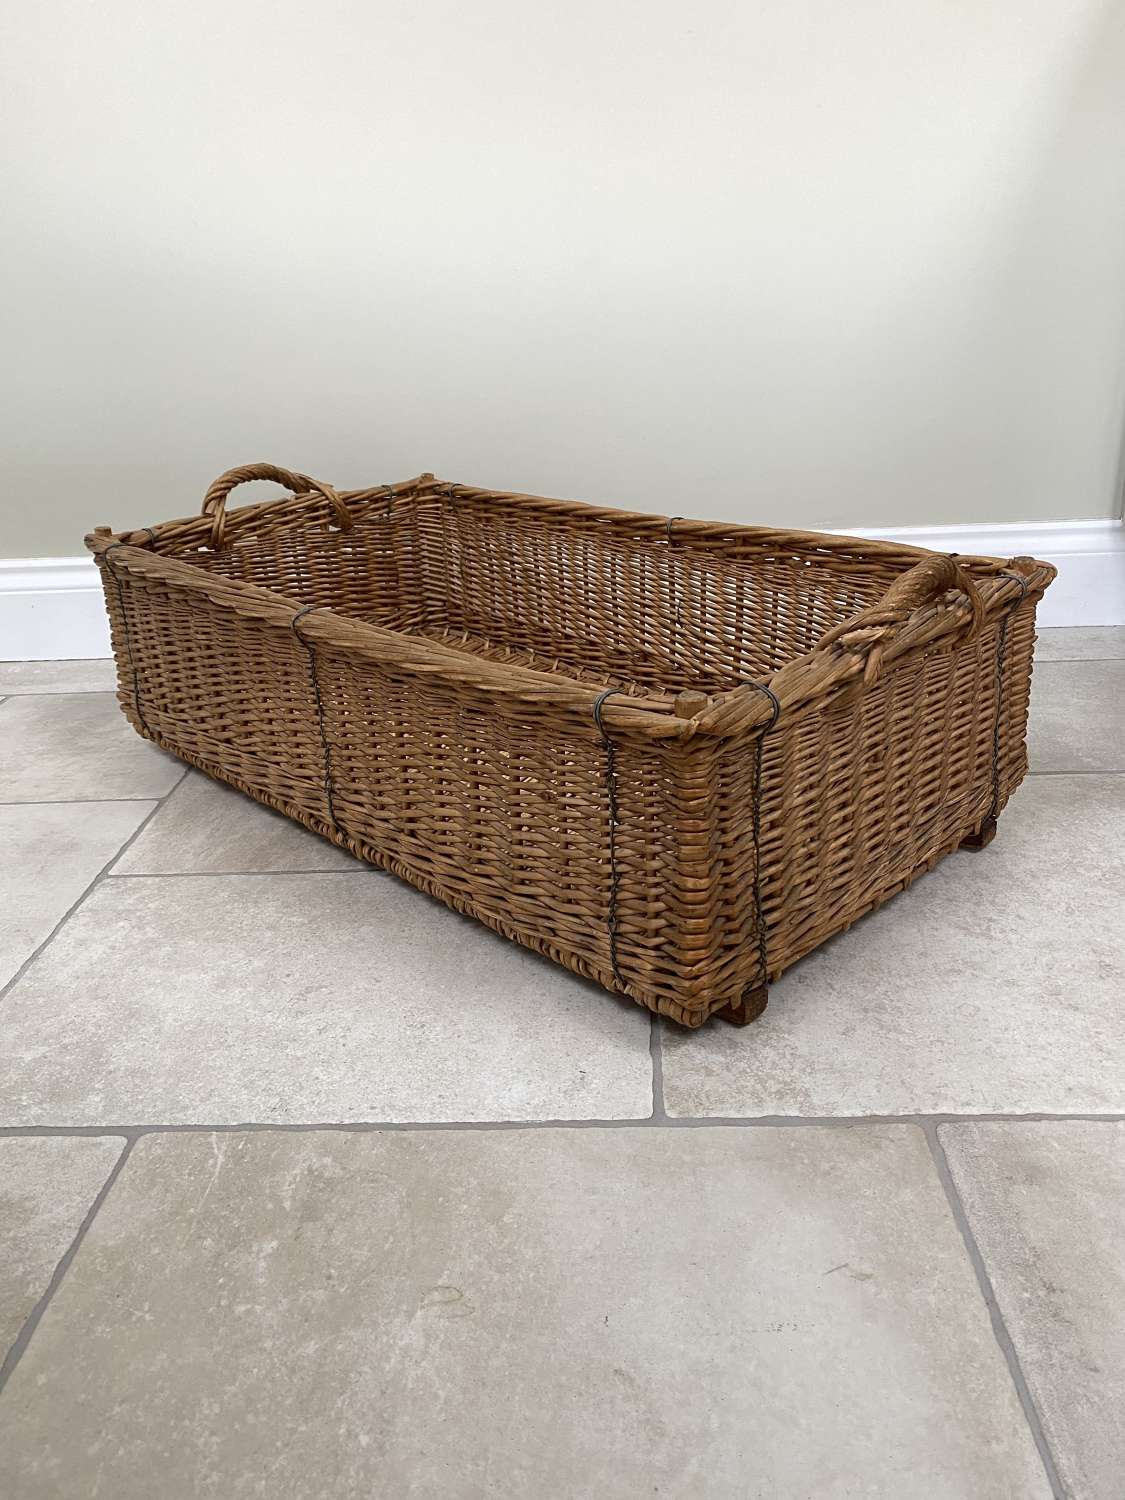 Early 20th Century Excellent Condition Rectangular Basket